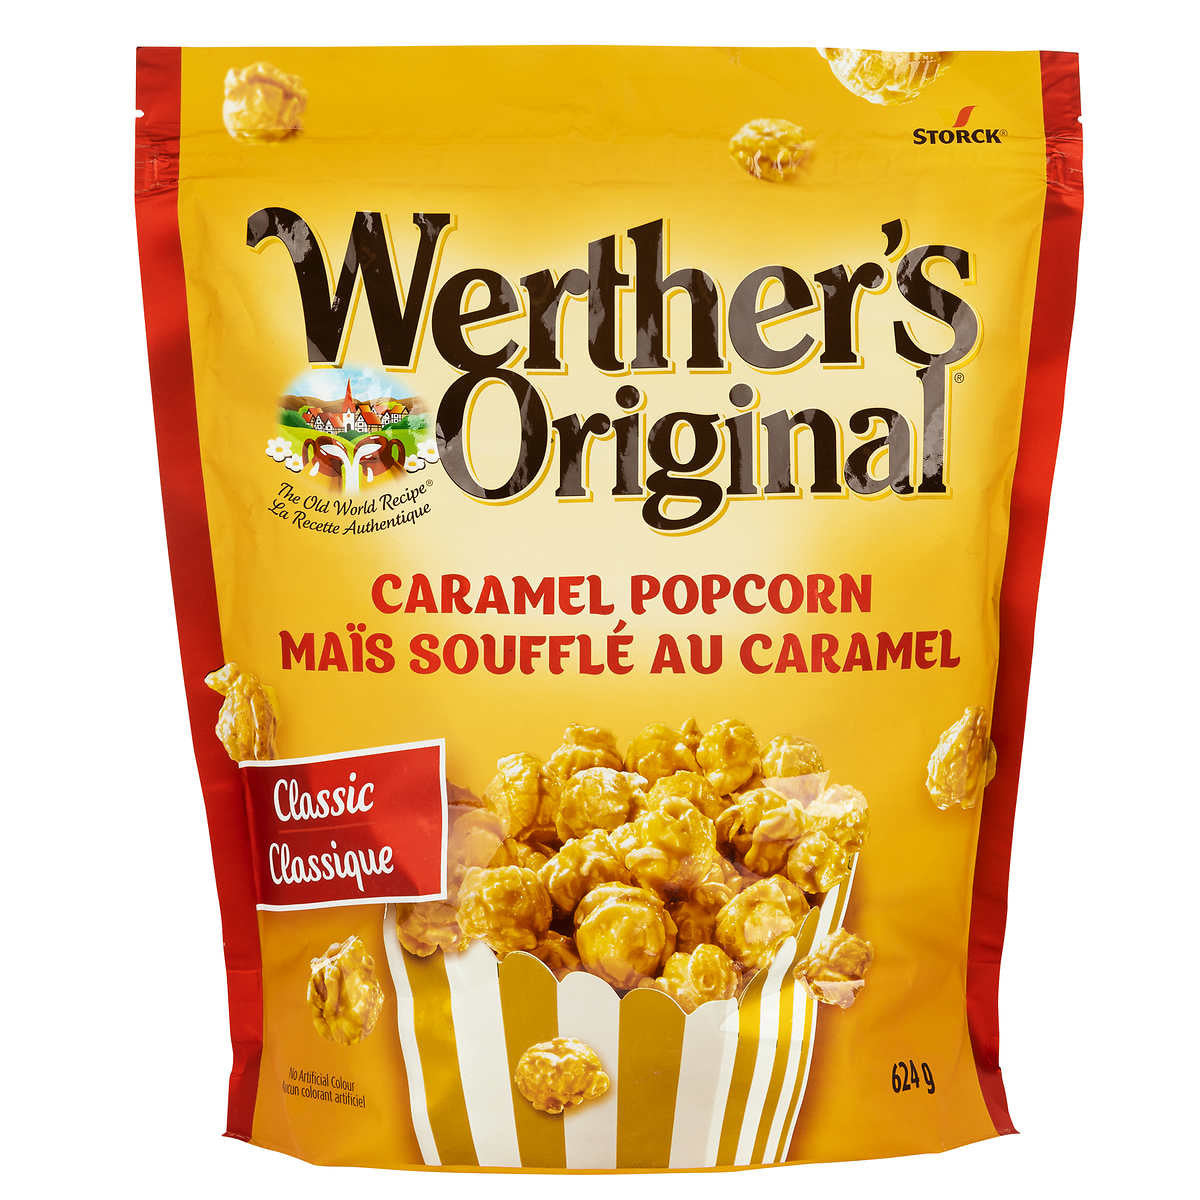 Werther's Original Caramel Popcorn, 624g/22oz. (Imported from Canada)